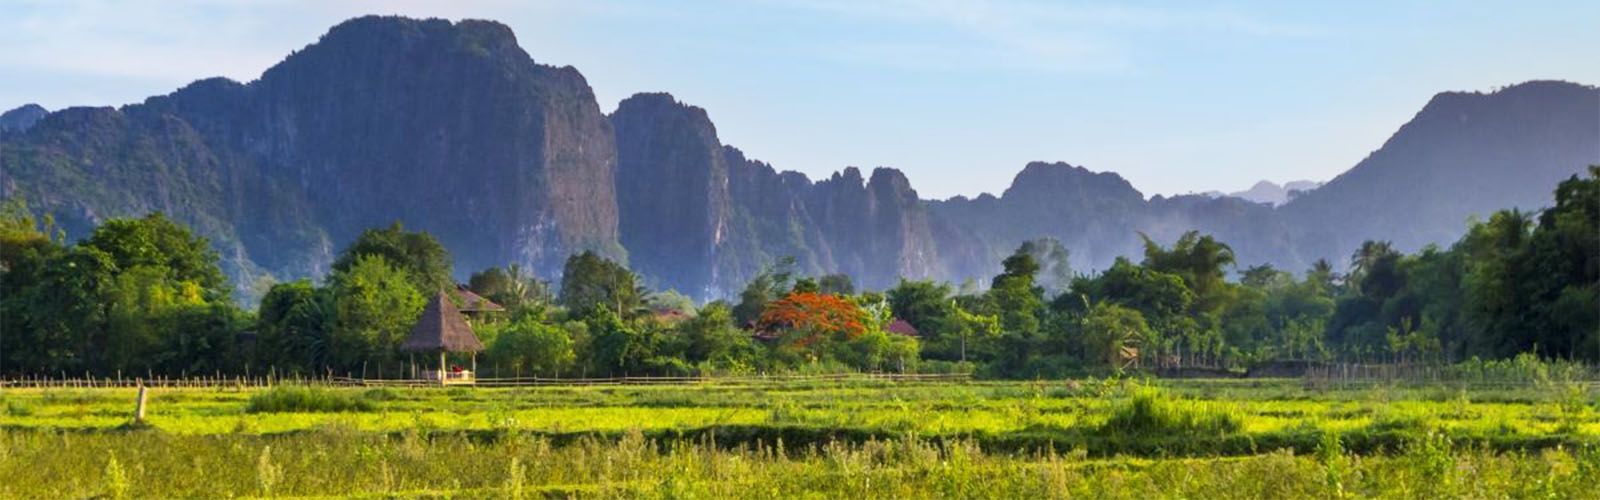 Travel To And From Laos Overland | best place | Asianventure Tours